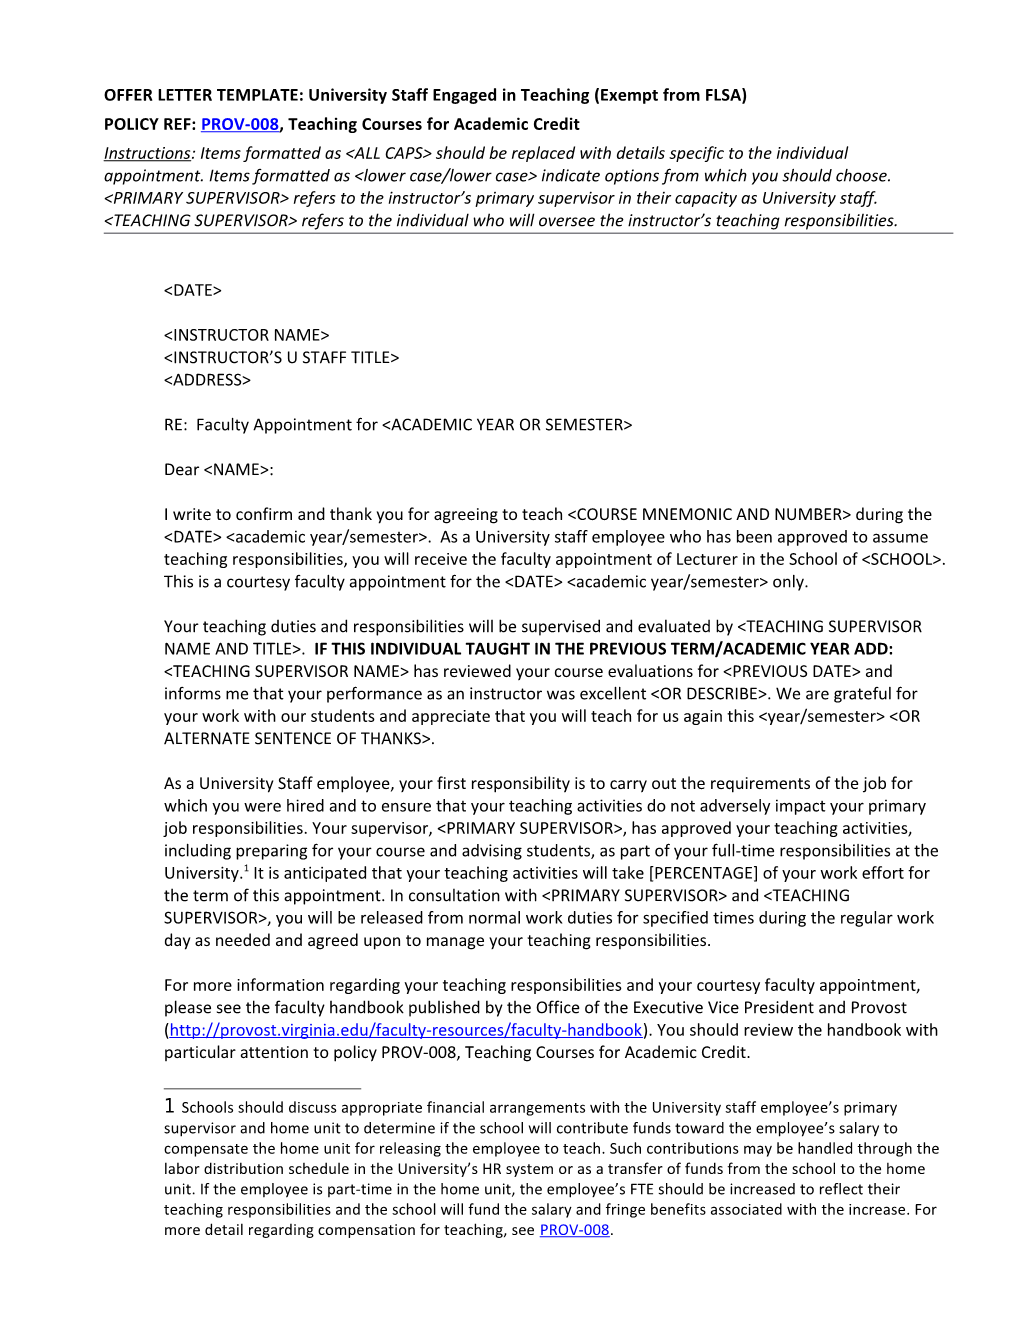 OFFER LETTER TEMPLATE: University Staff Engaged in Teaching (Exempt from FLSA)